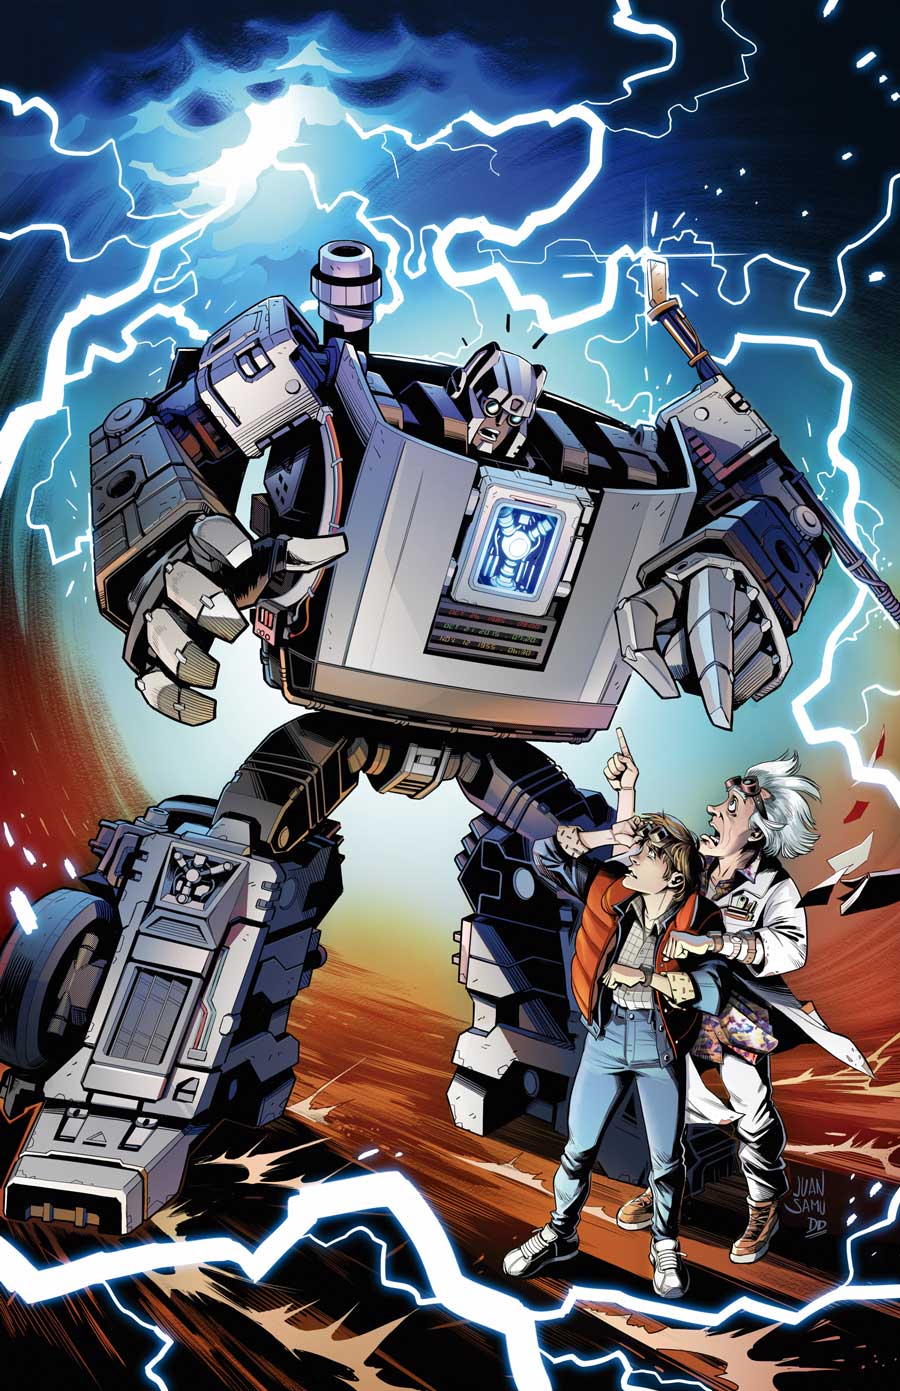 Transformers / Back to the Future Comic Book Crossover Debuts from IDW Publishing